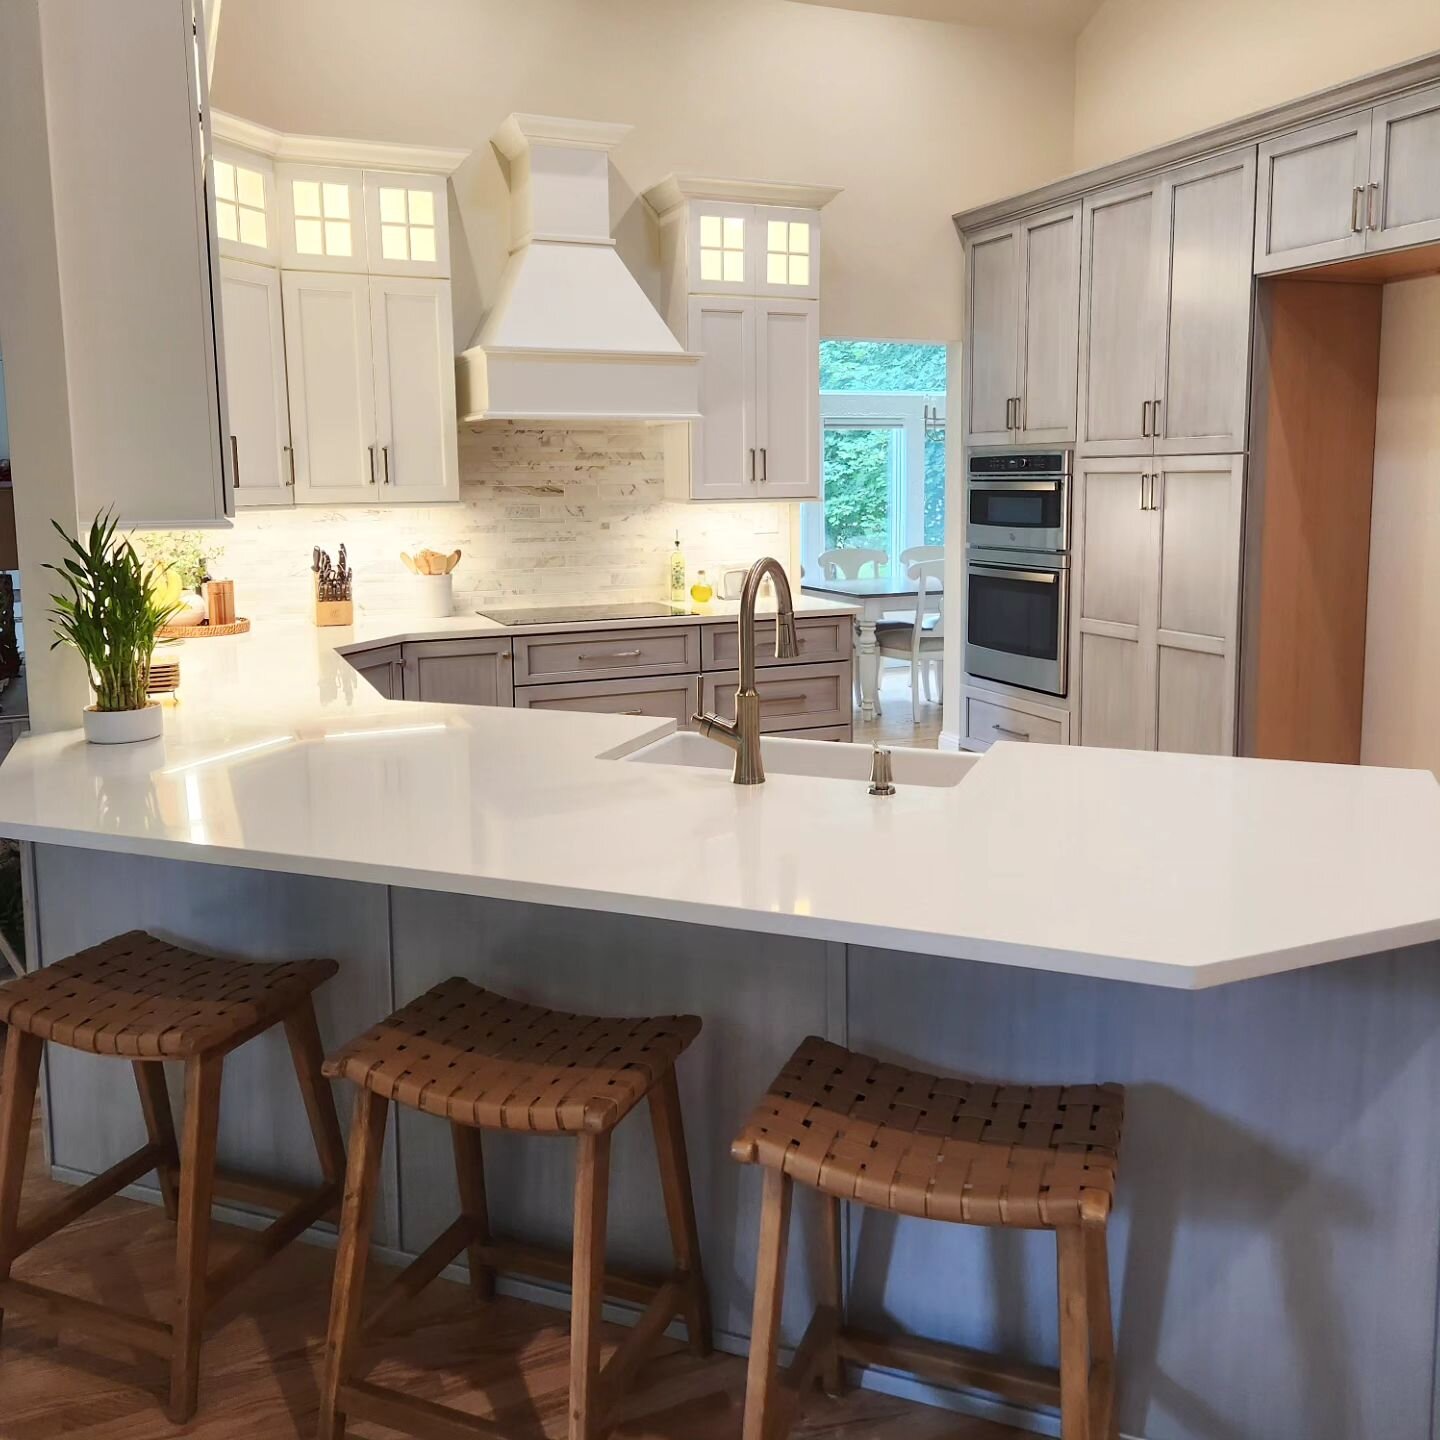 Our spring renovation in Miller Place is almost complete...the long awaited Subzero refrigerator is coming in next week! 🙌
.
.
.
.
.
.
.
.
Cabinets @candlelight_cabinetry 
Countertop @msisurfaces_longisland 
Sink @houseofrohl 
Faucet @hansgrohe_usa
